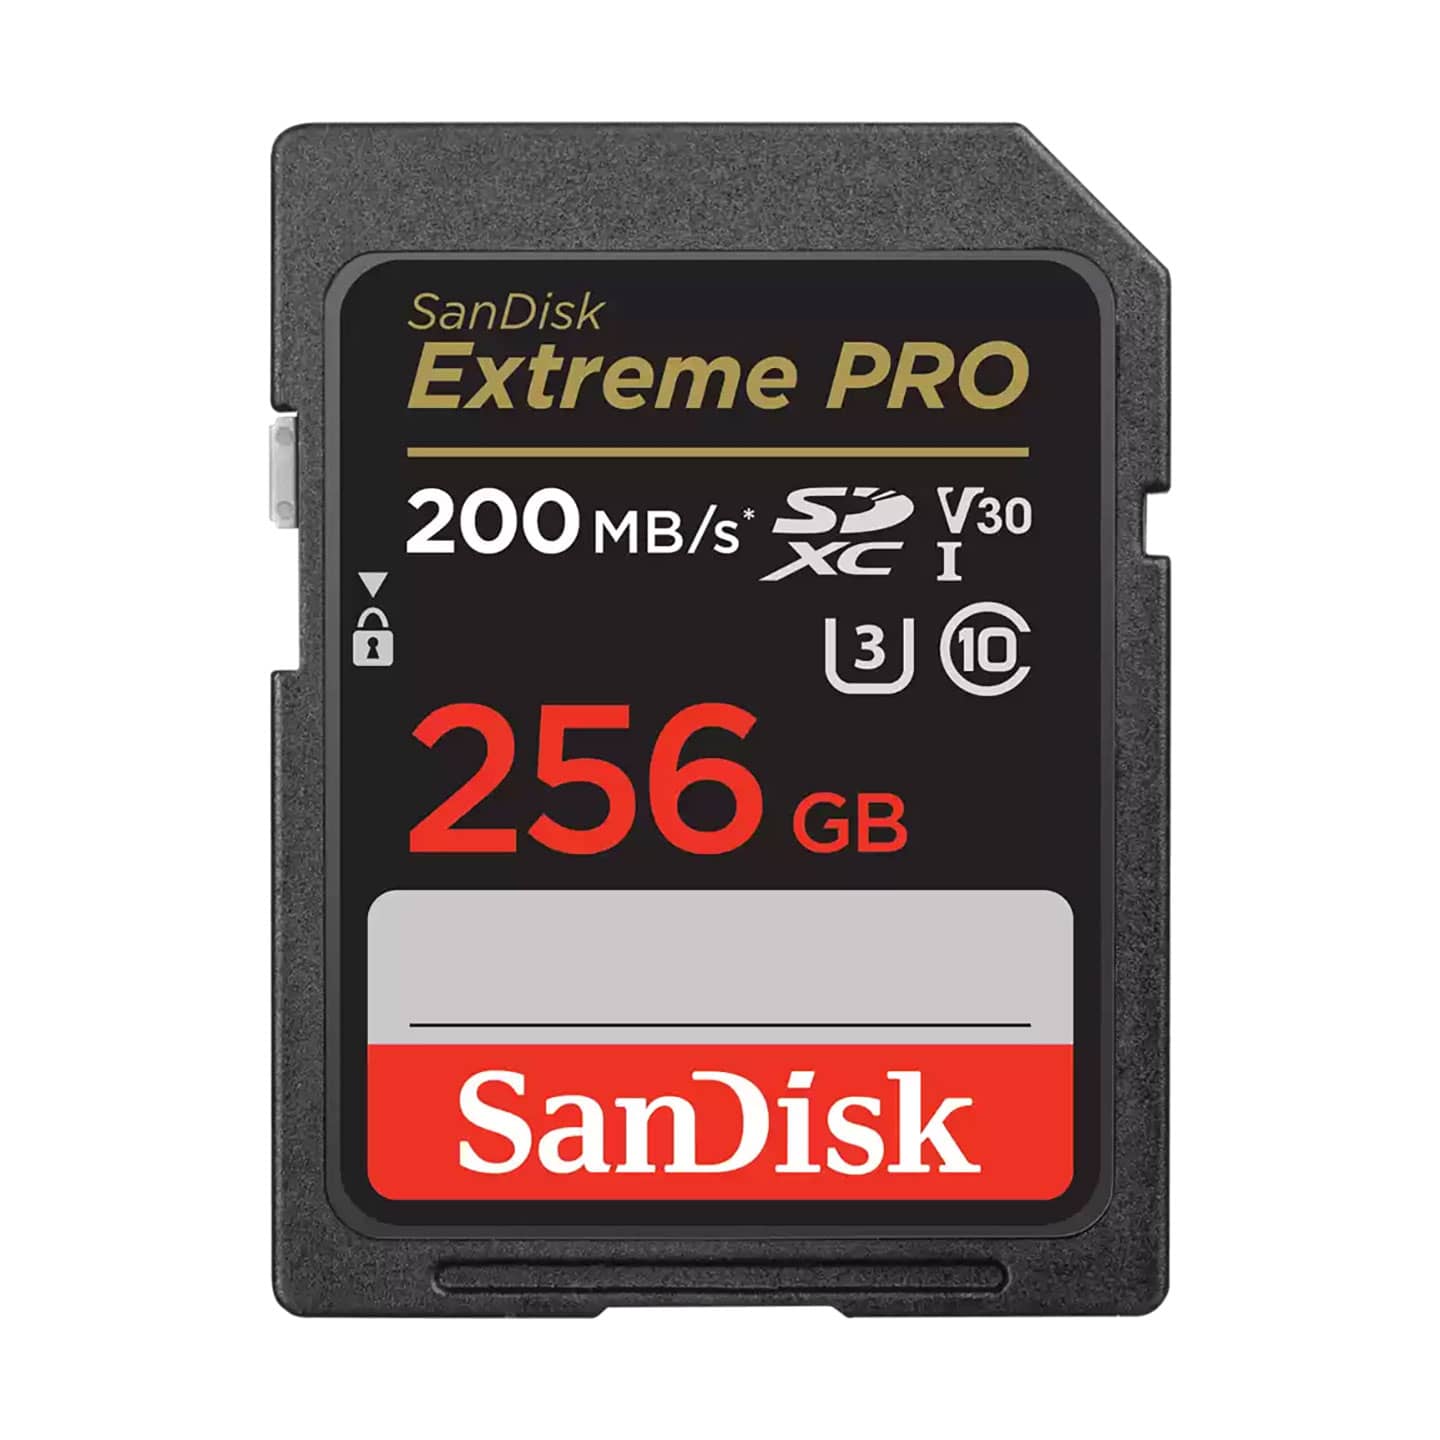 sandisk_extreme_pro_sdxc_uhsi_256gb_sdsdxxd-256g-gn4in_01